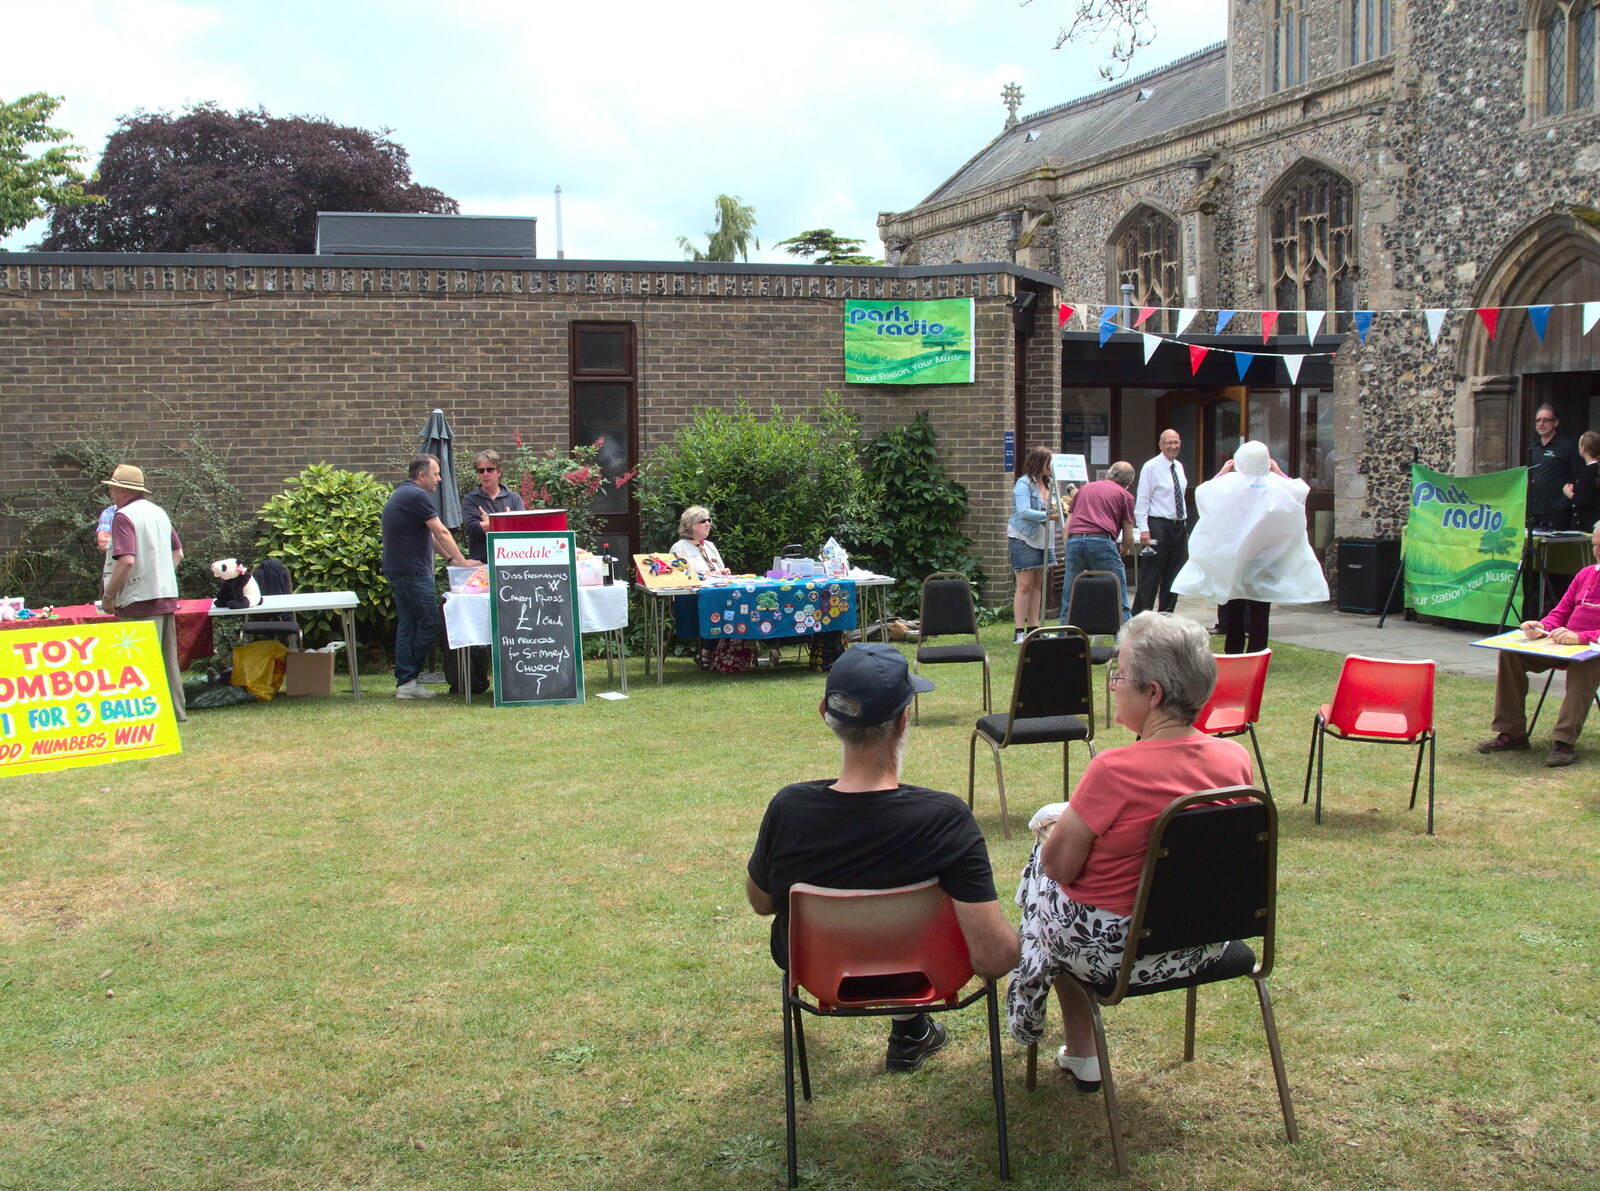 St. Mary's church hall in Diss from A Busy Day and a Church Fair, Diss, Norfolk - 28th June 2014